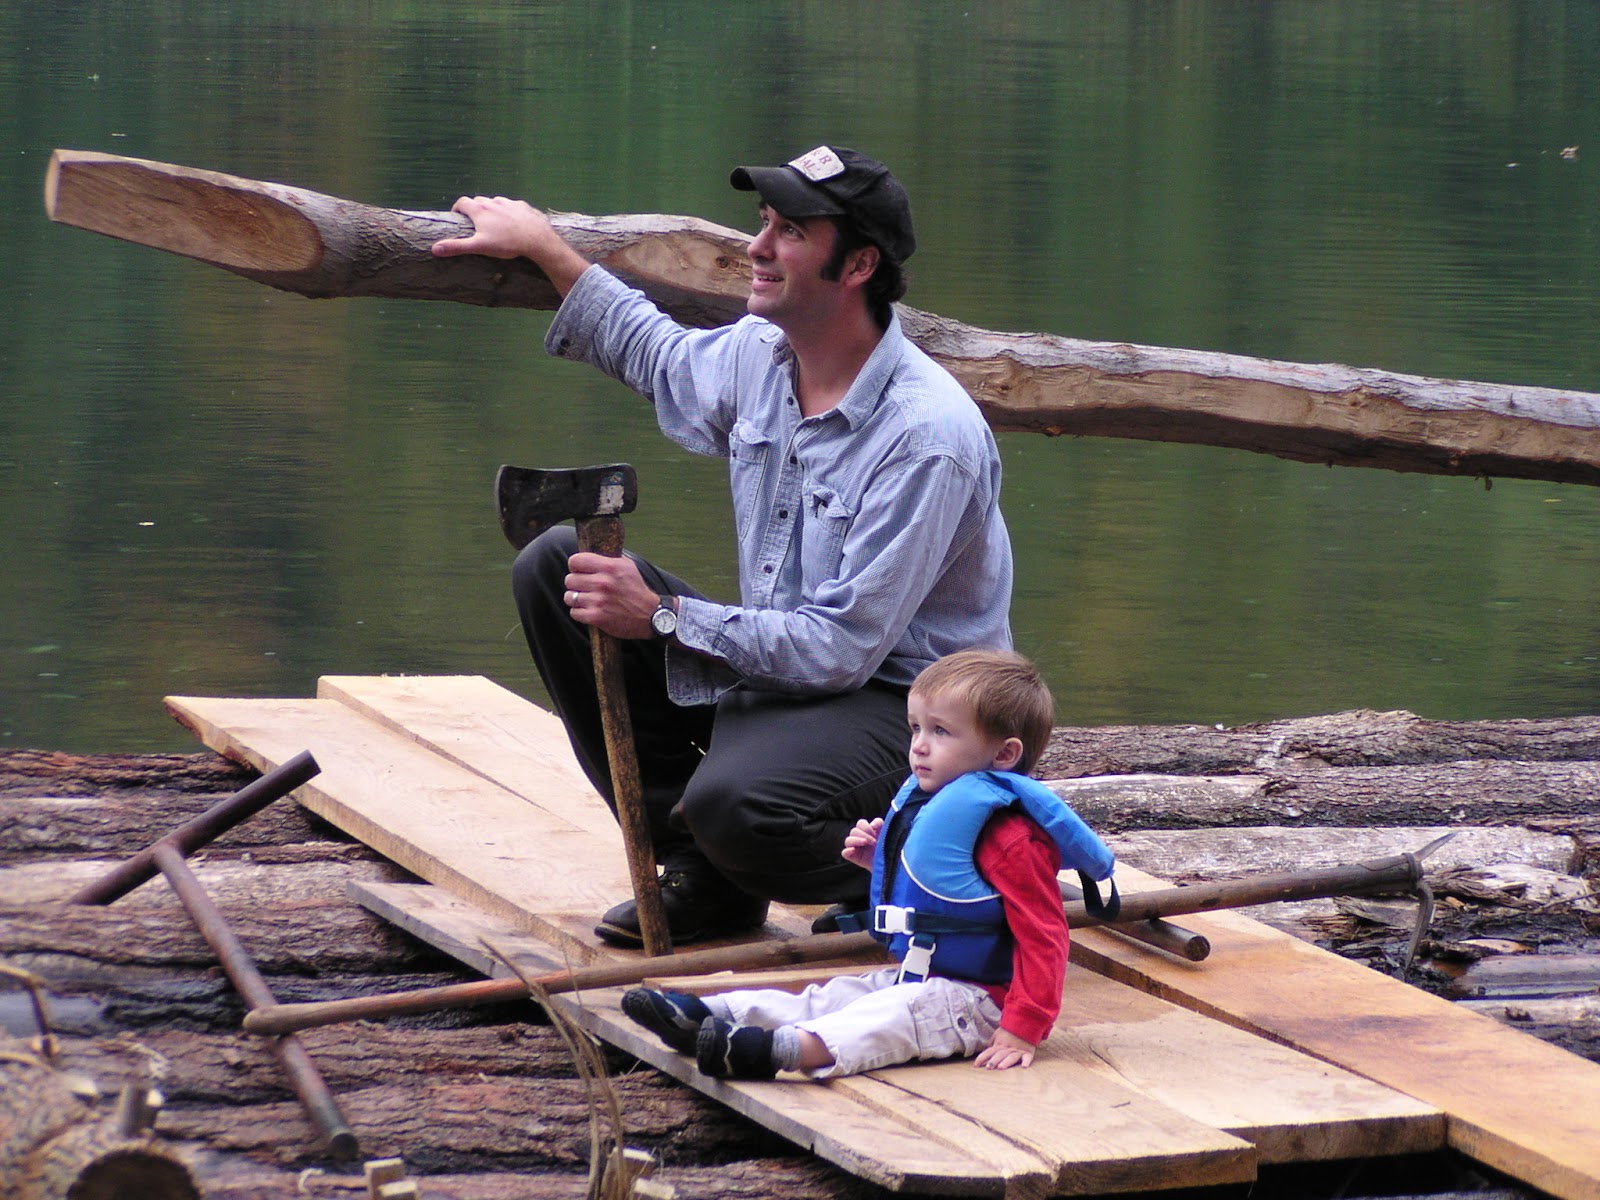 A man and a young child riding a log raft on the Susquehanna River